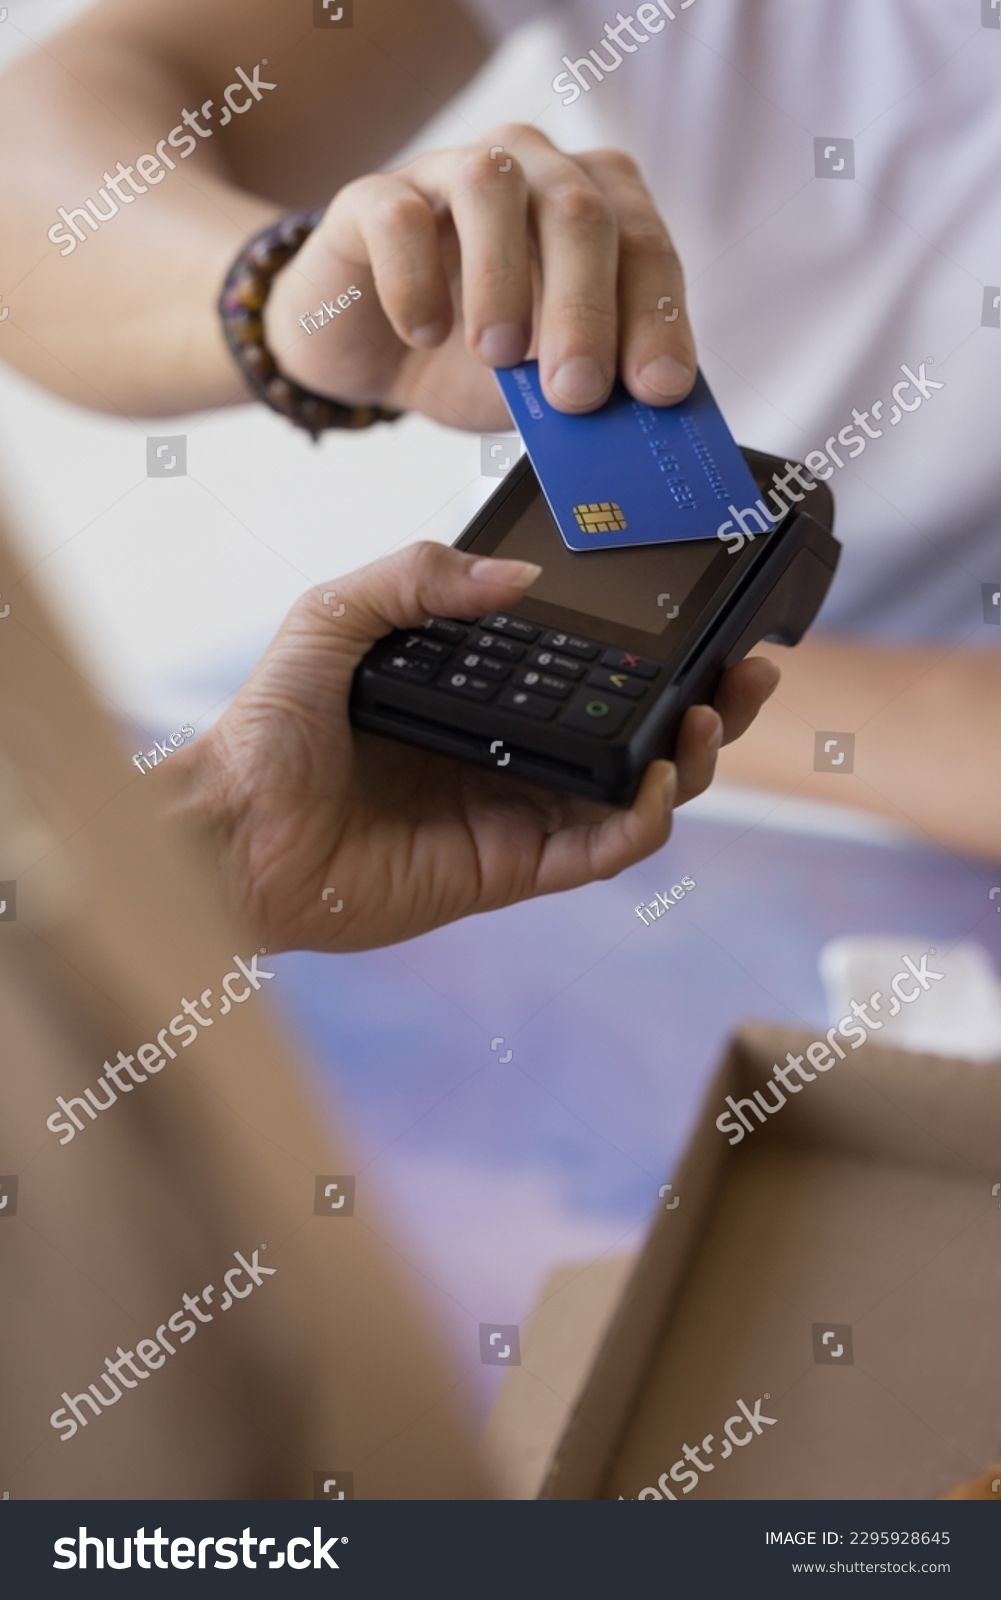 Man purchasing goods, commercial services, paying bills, makes cashless contactless quick payment for order applies credit card on POS terminal cashier machine, close up vertical view. NFC technology #2295928645